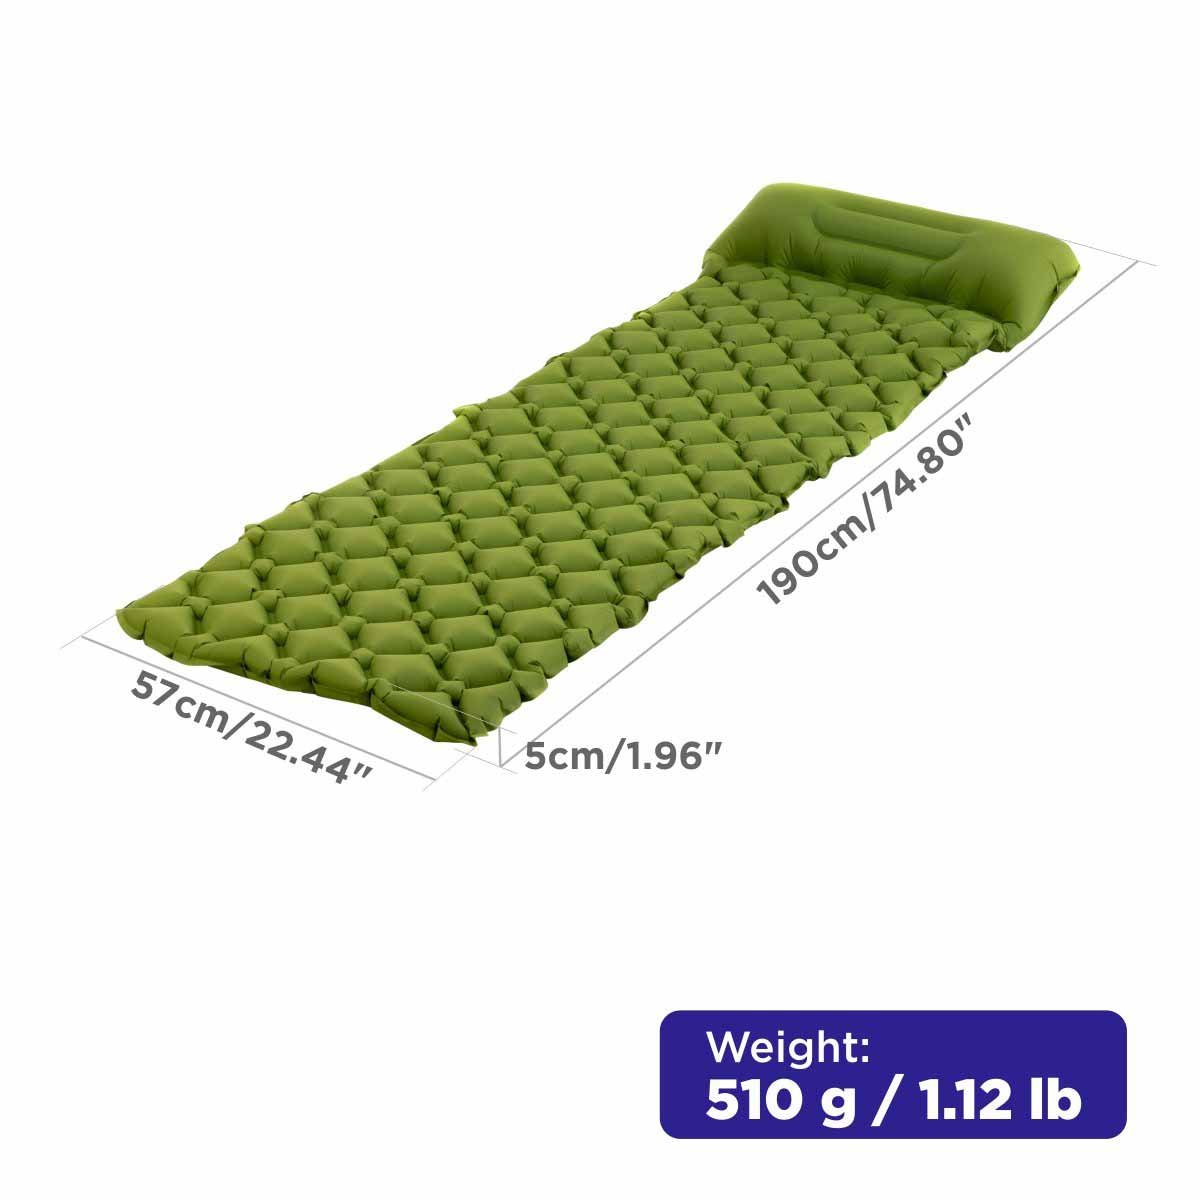 2-inch Waterproof Camping Self Inflating Sleeping is 2 inches thick, 74.8 inches long and 22.44 inches wide. It is extreme;y lightweight - only 1.12 lbs!